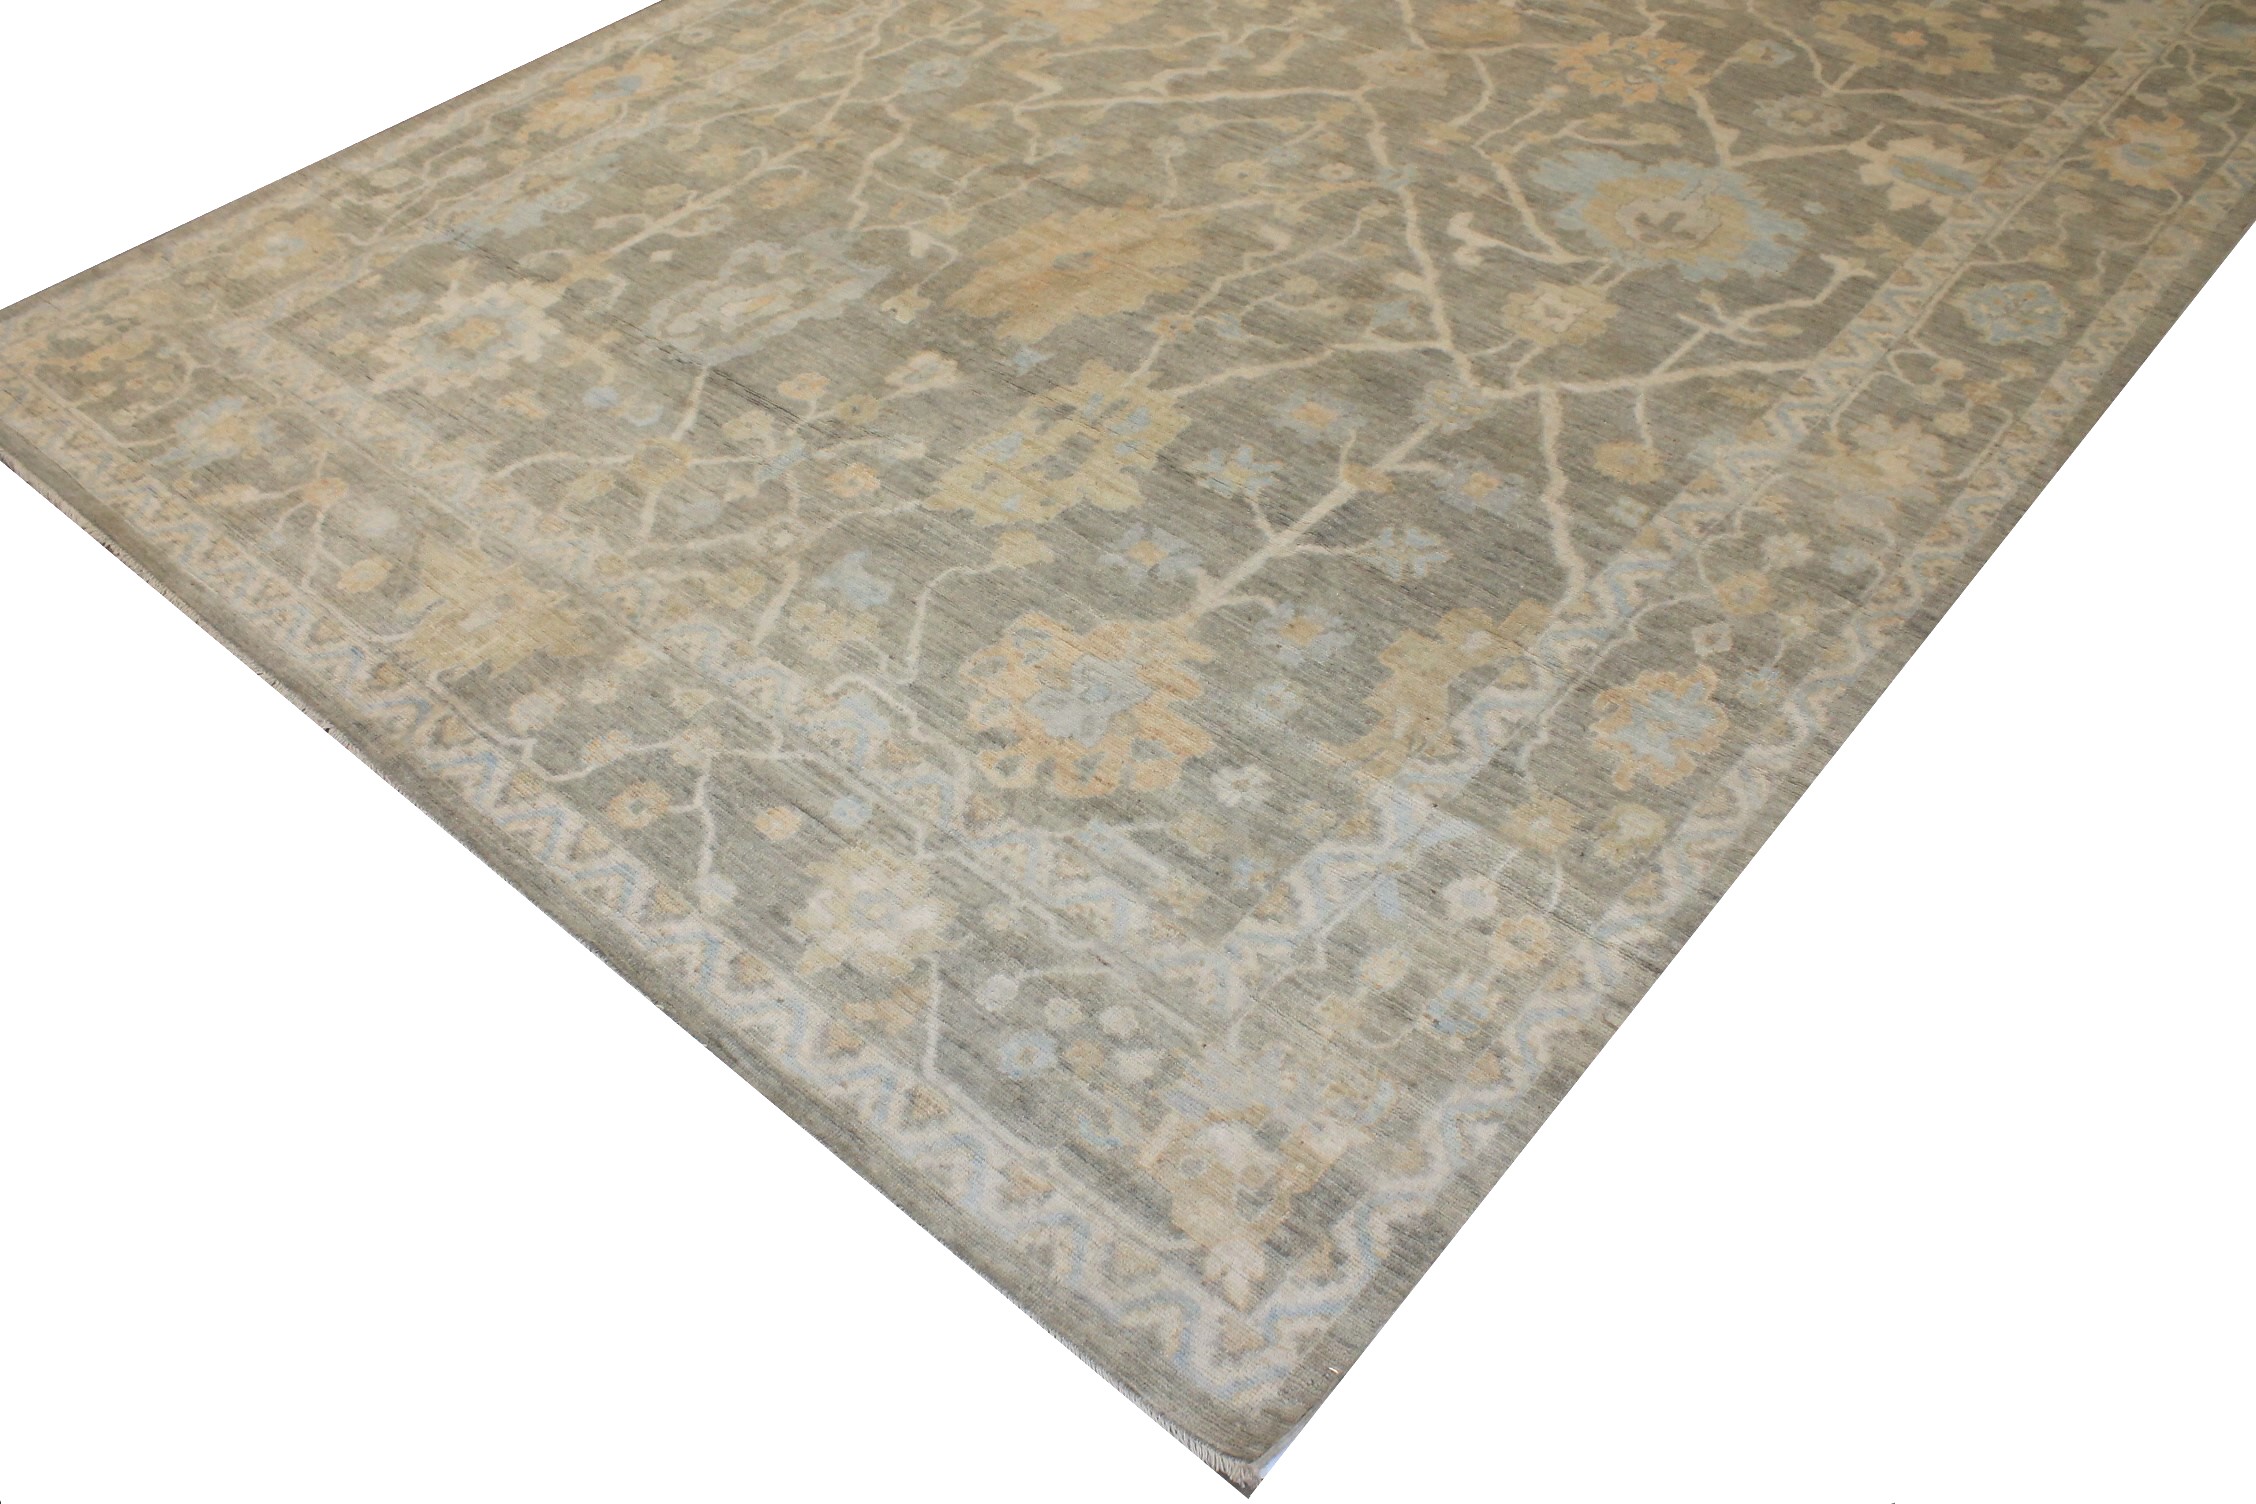 10x14 Oushak Hand Knotted Wool Area Rug - MR027291